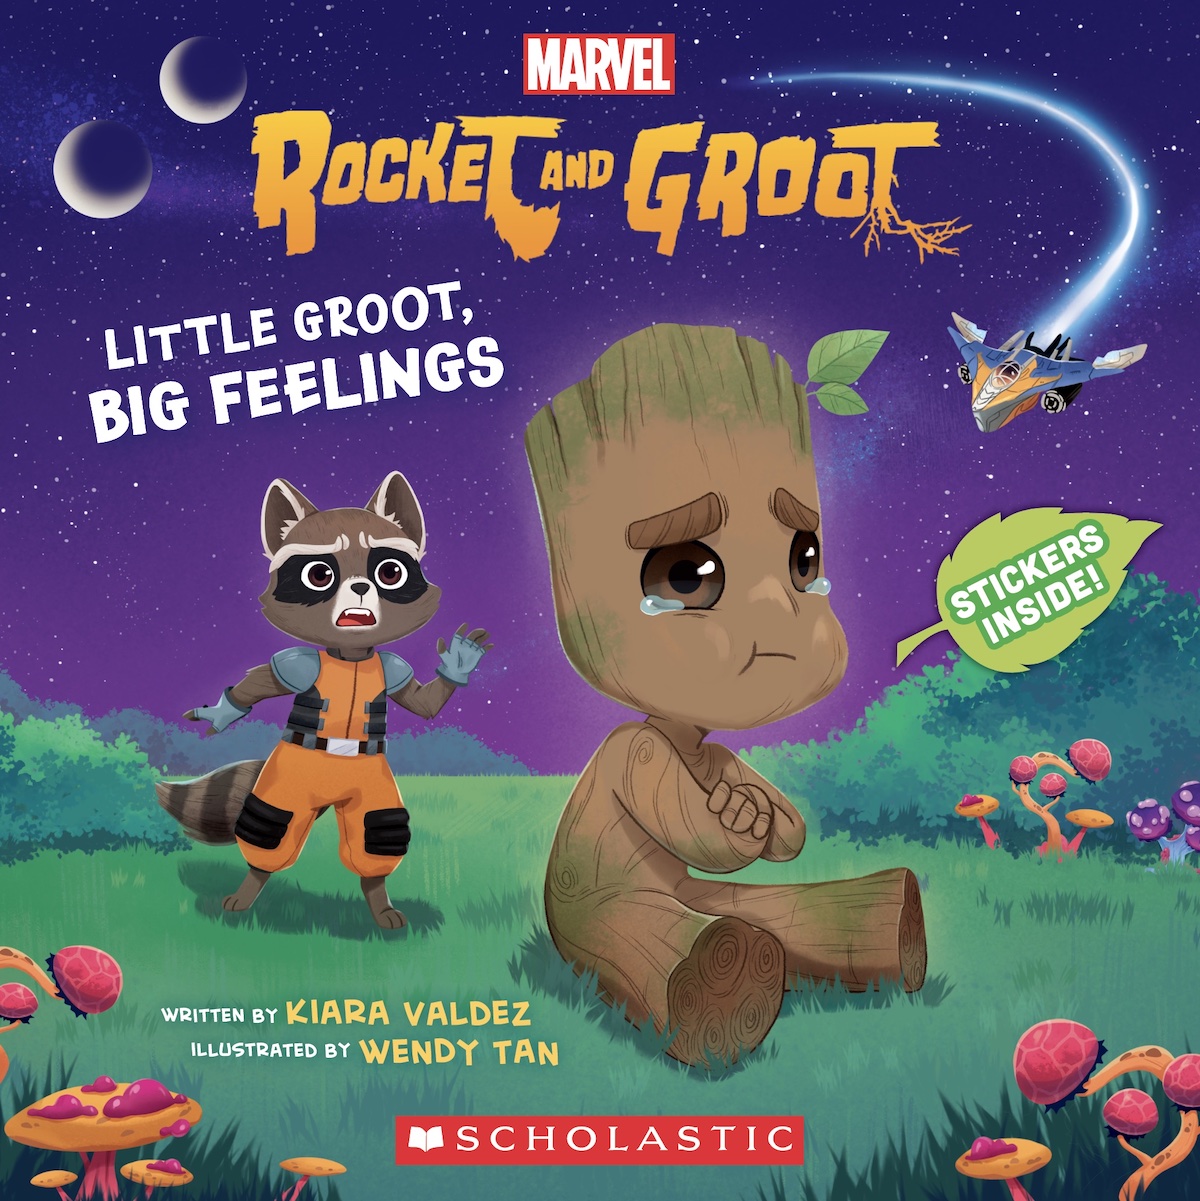 Rocket and Groot: Little Groot, Big Feelings from Marvel and Scholastic, written by Kiara Valdez and illustrated by Wendy Tan.